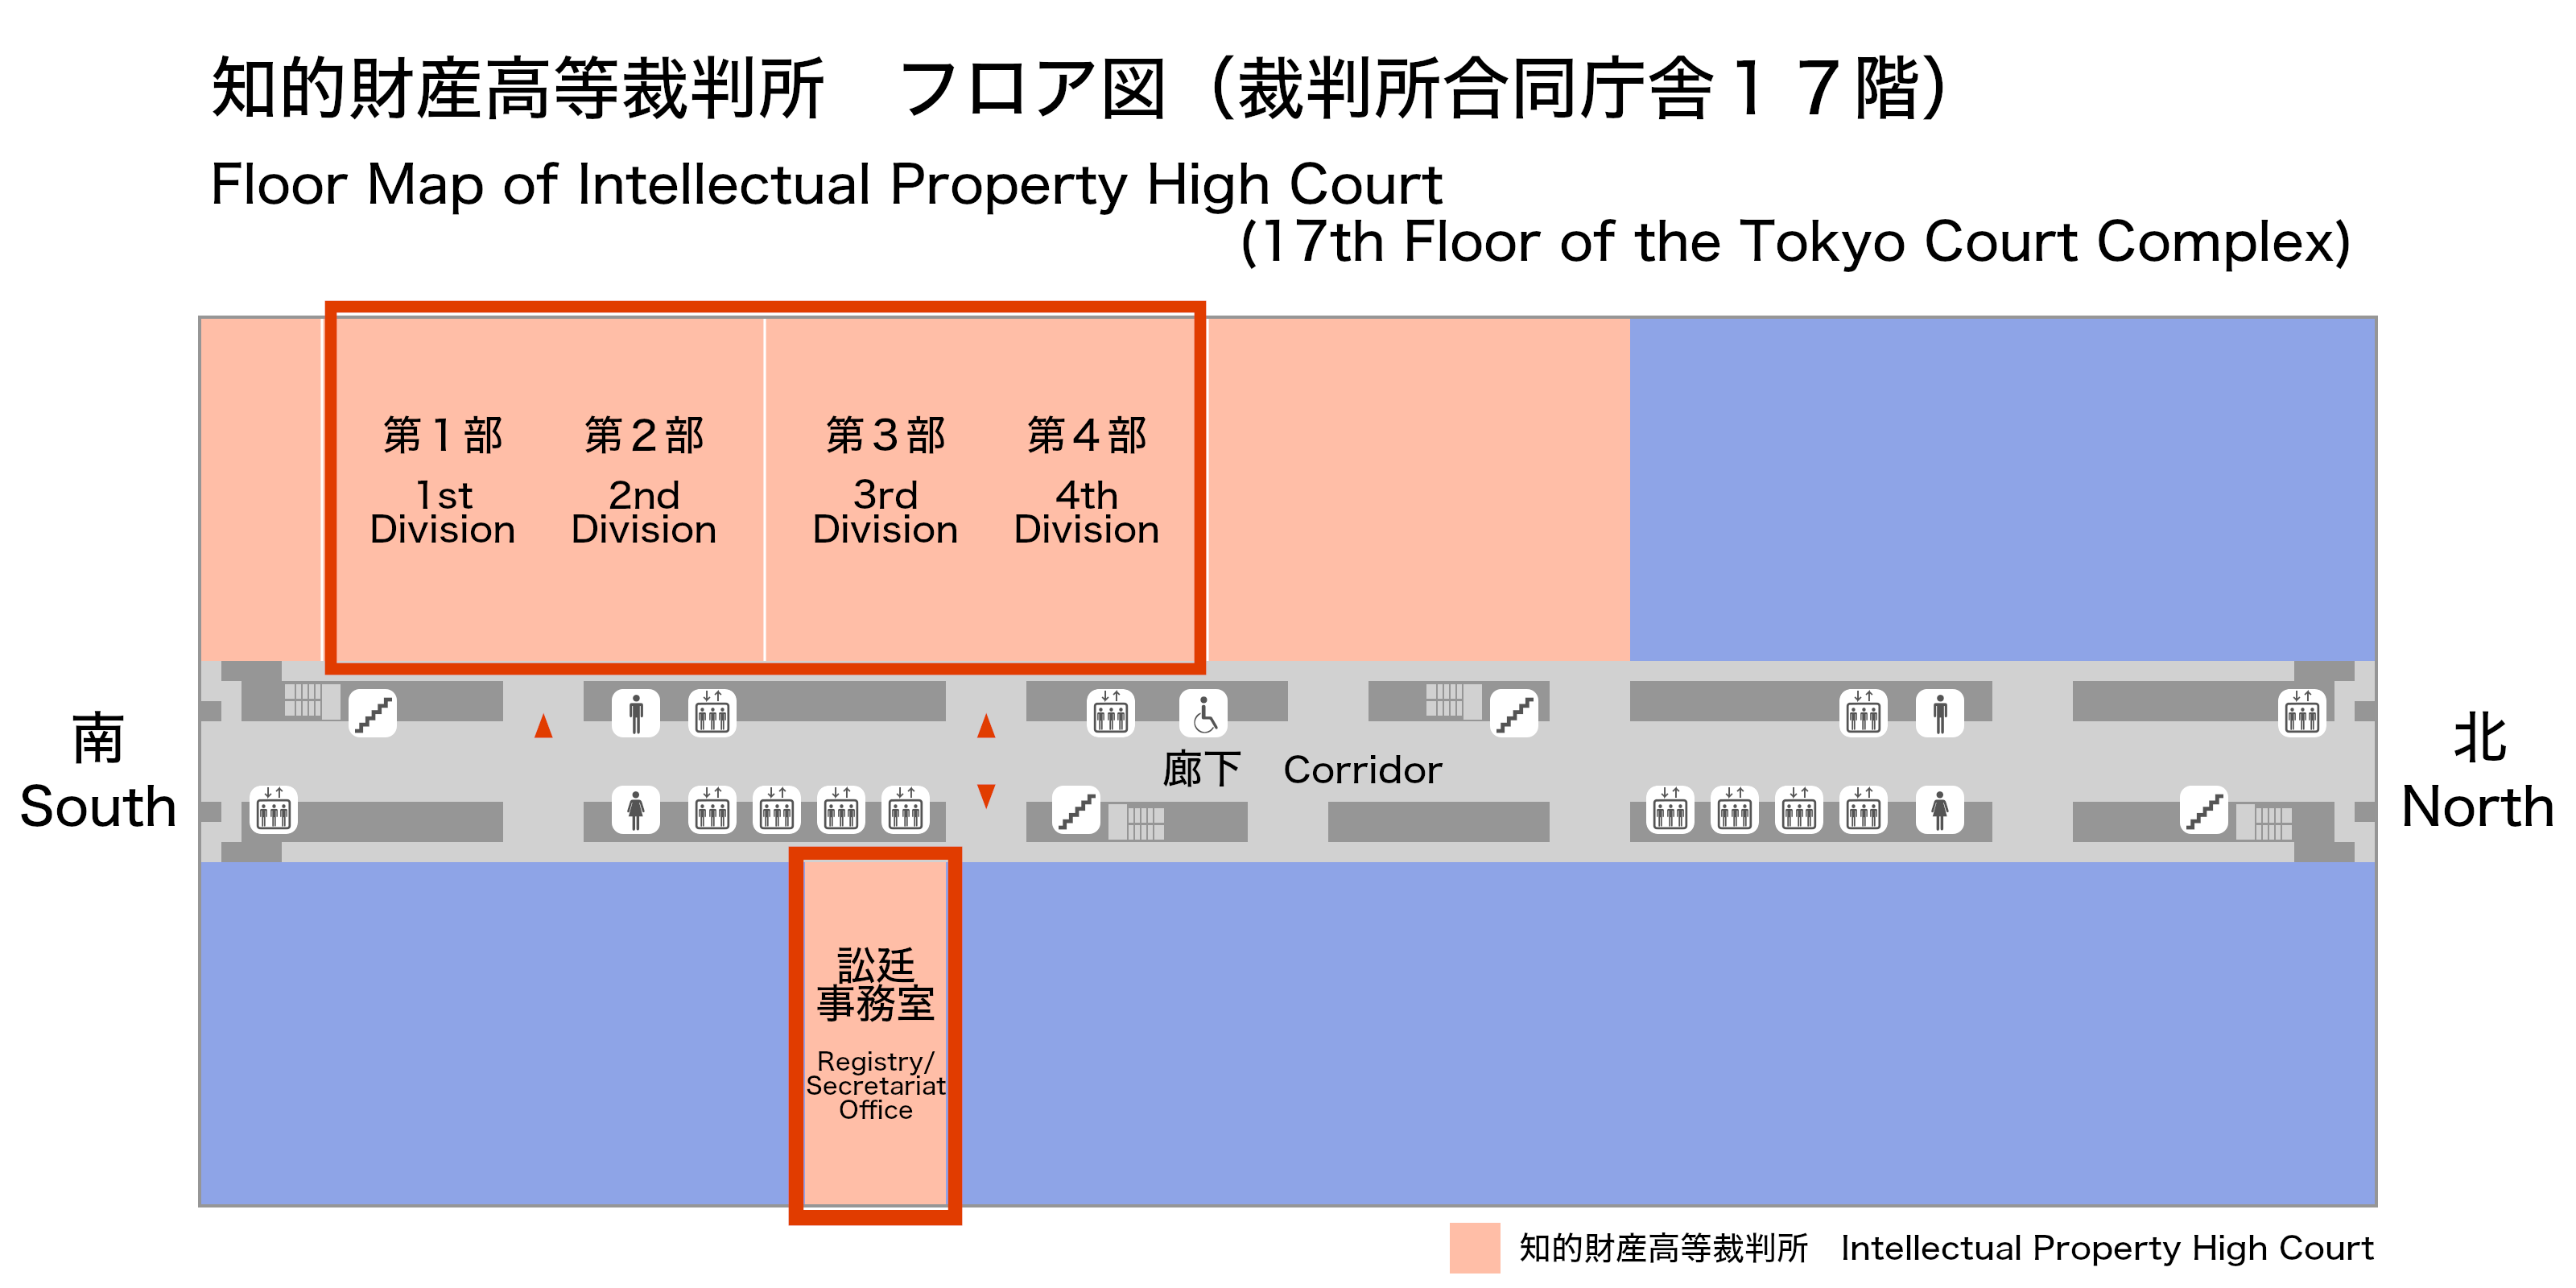 Floor guide of the IP High Court: 17th floor of the Tokyo Court Complex; the Office of court clerks for the First Division, Office of court clerks for the Second Division, Office of court clerks for the Third Division, and Office of court clerks for the Fourth Division are in a row starting from the location of the Ministry of Agriculture, Forestry and Fisheries, with the Registry/Secretariat Office located across the corridor.